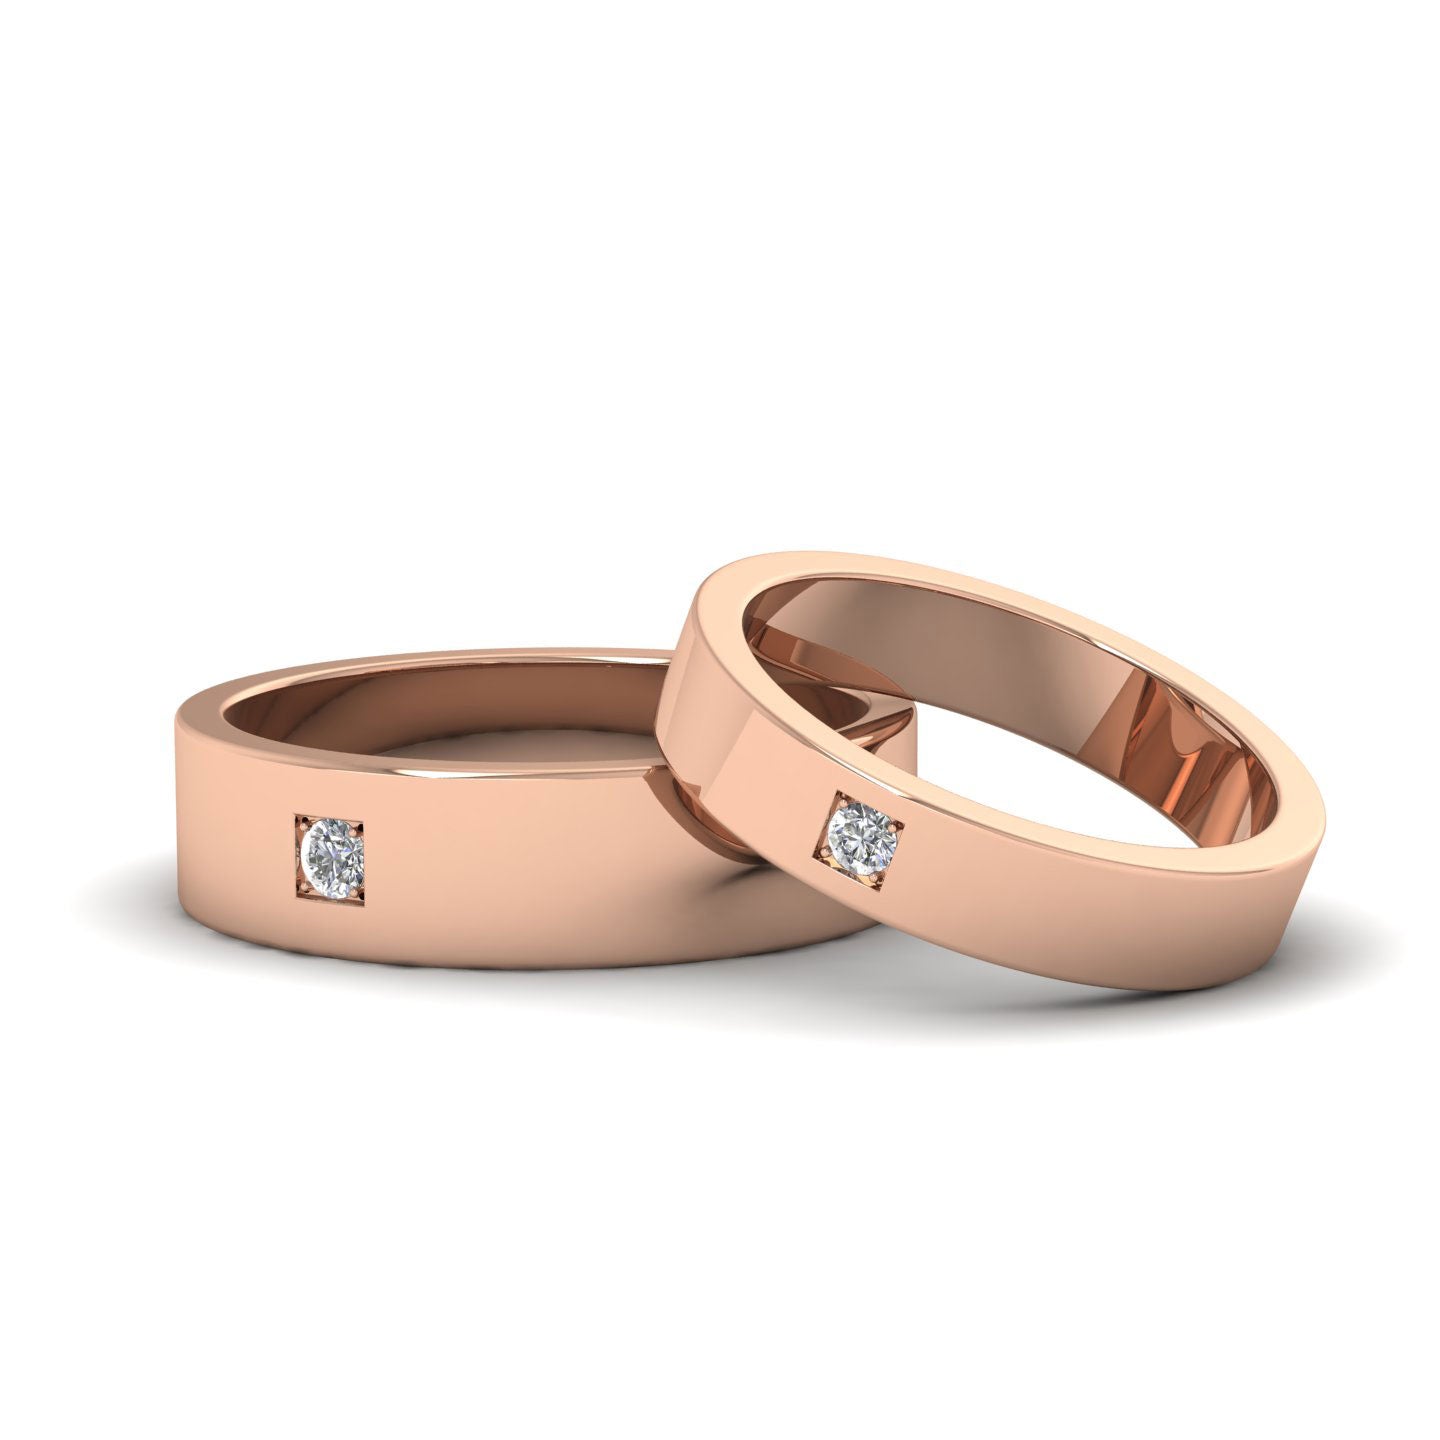 Single Diamond With Square Setting 9ct Rose Gold 4mm Wedding Ring